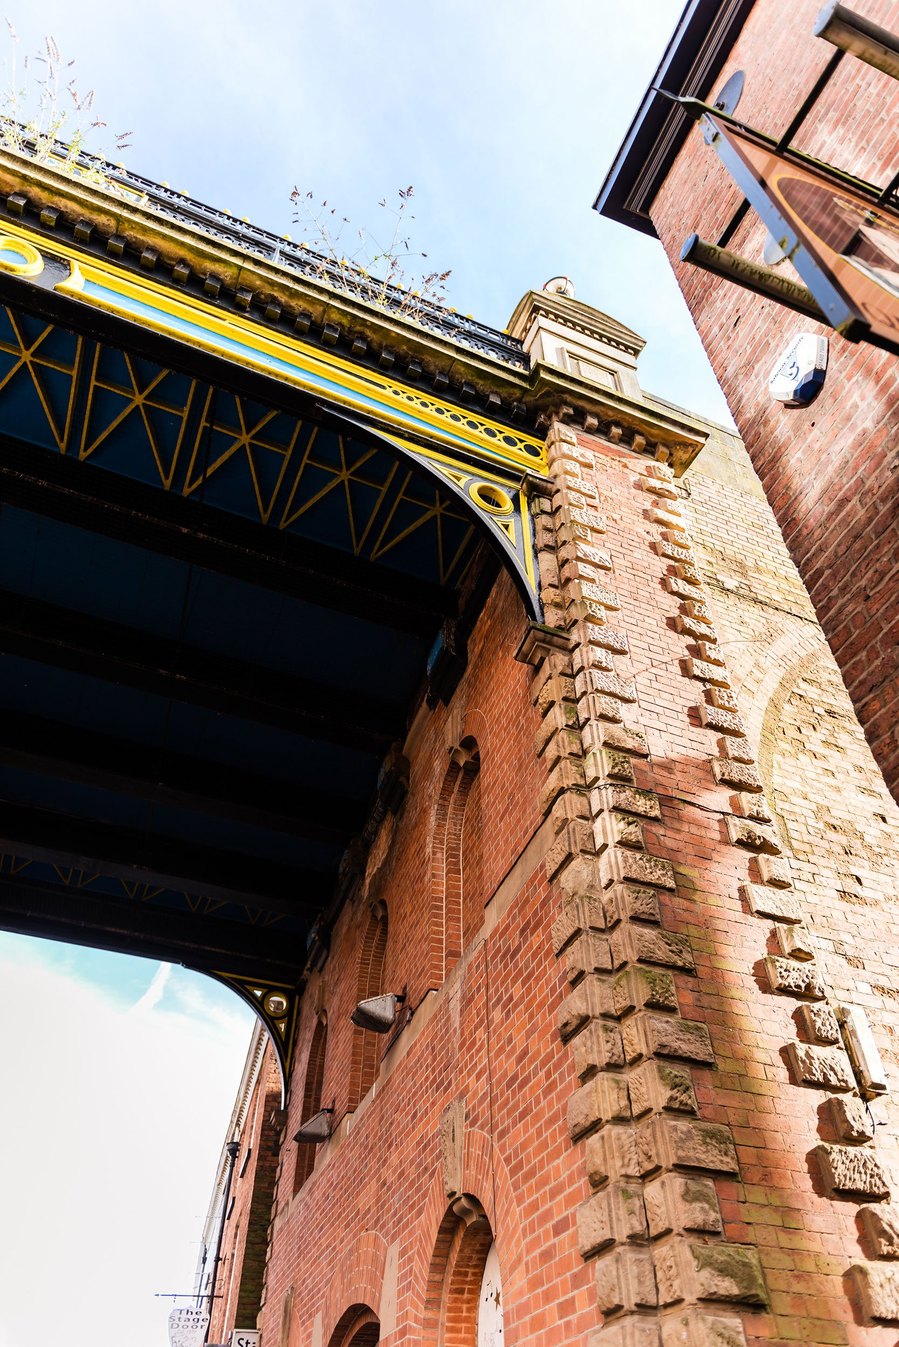 stockport lifestyle and placemaking photography, local architecture, bridge, abstract angle